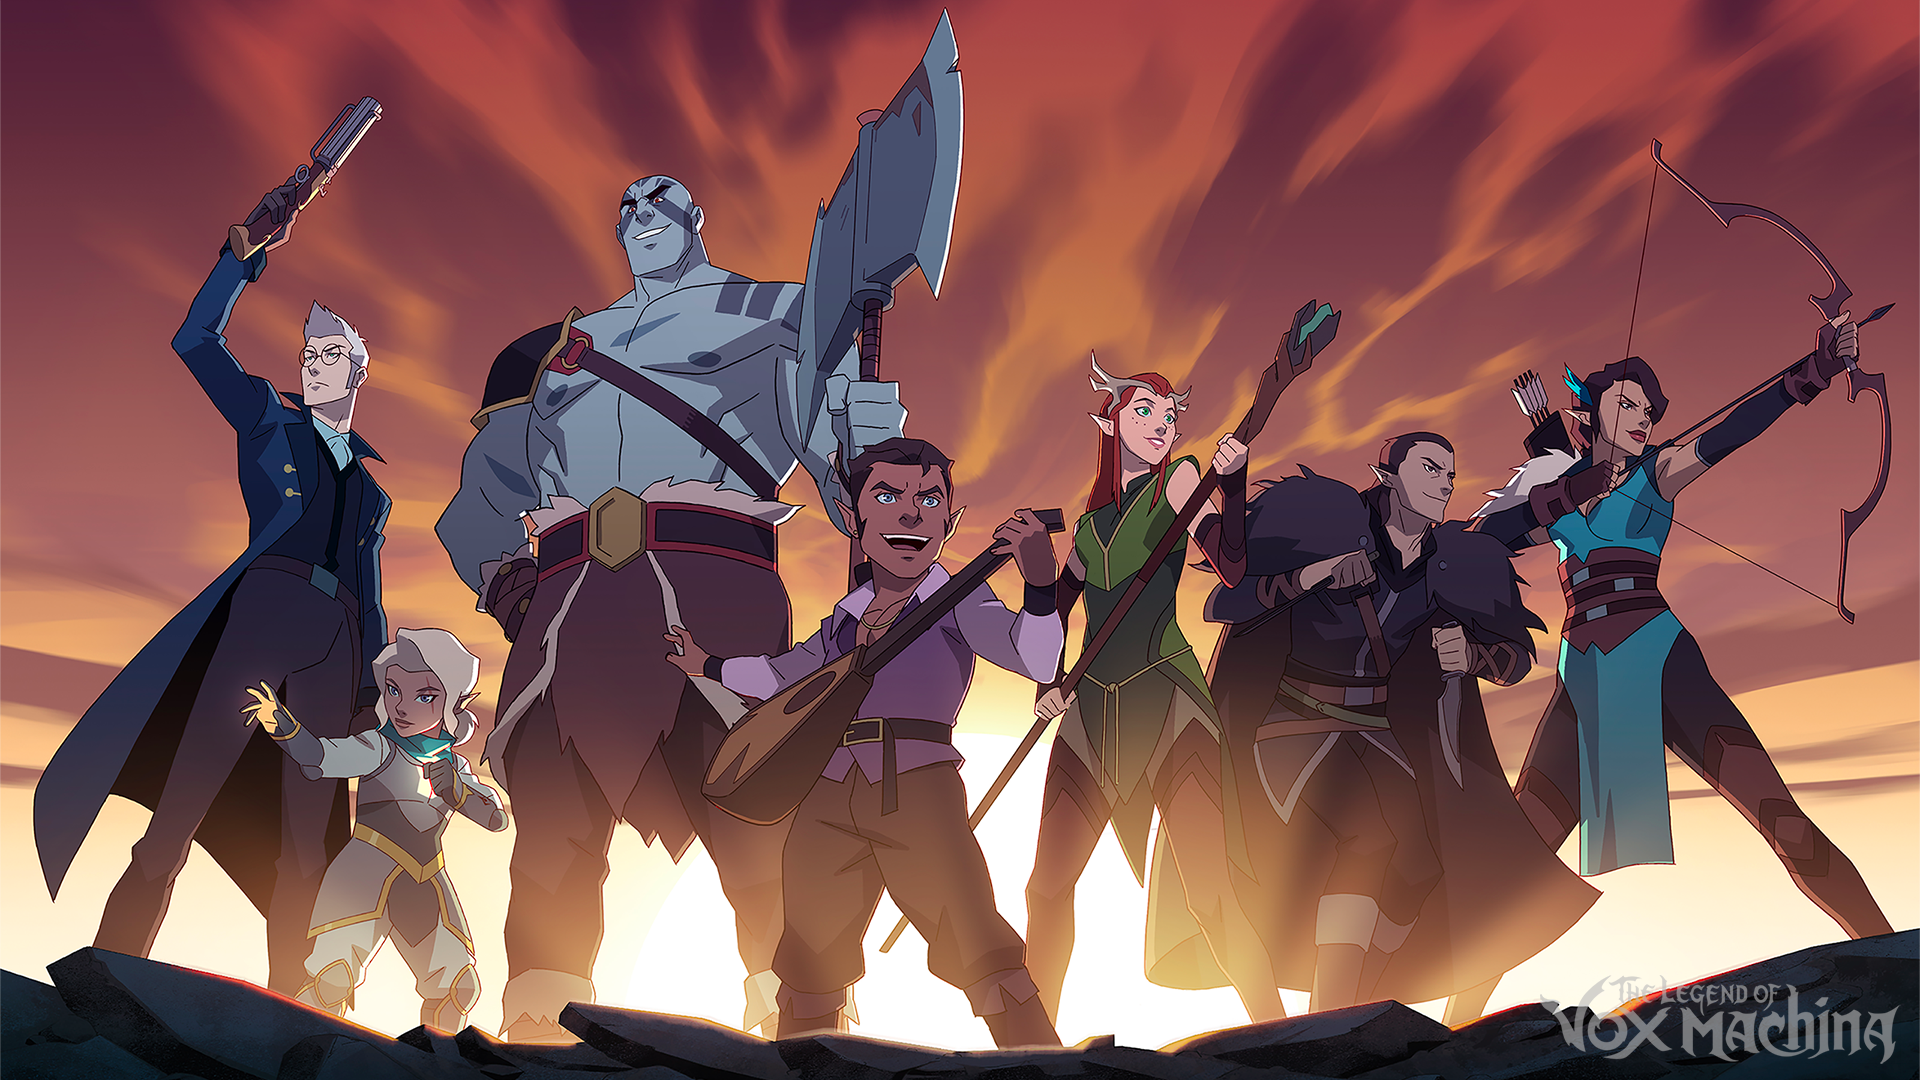 How 'The Legend of Vox Machina' brings a 'Dungeons and Dragons